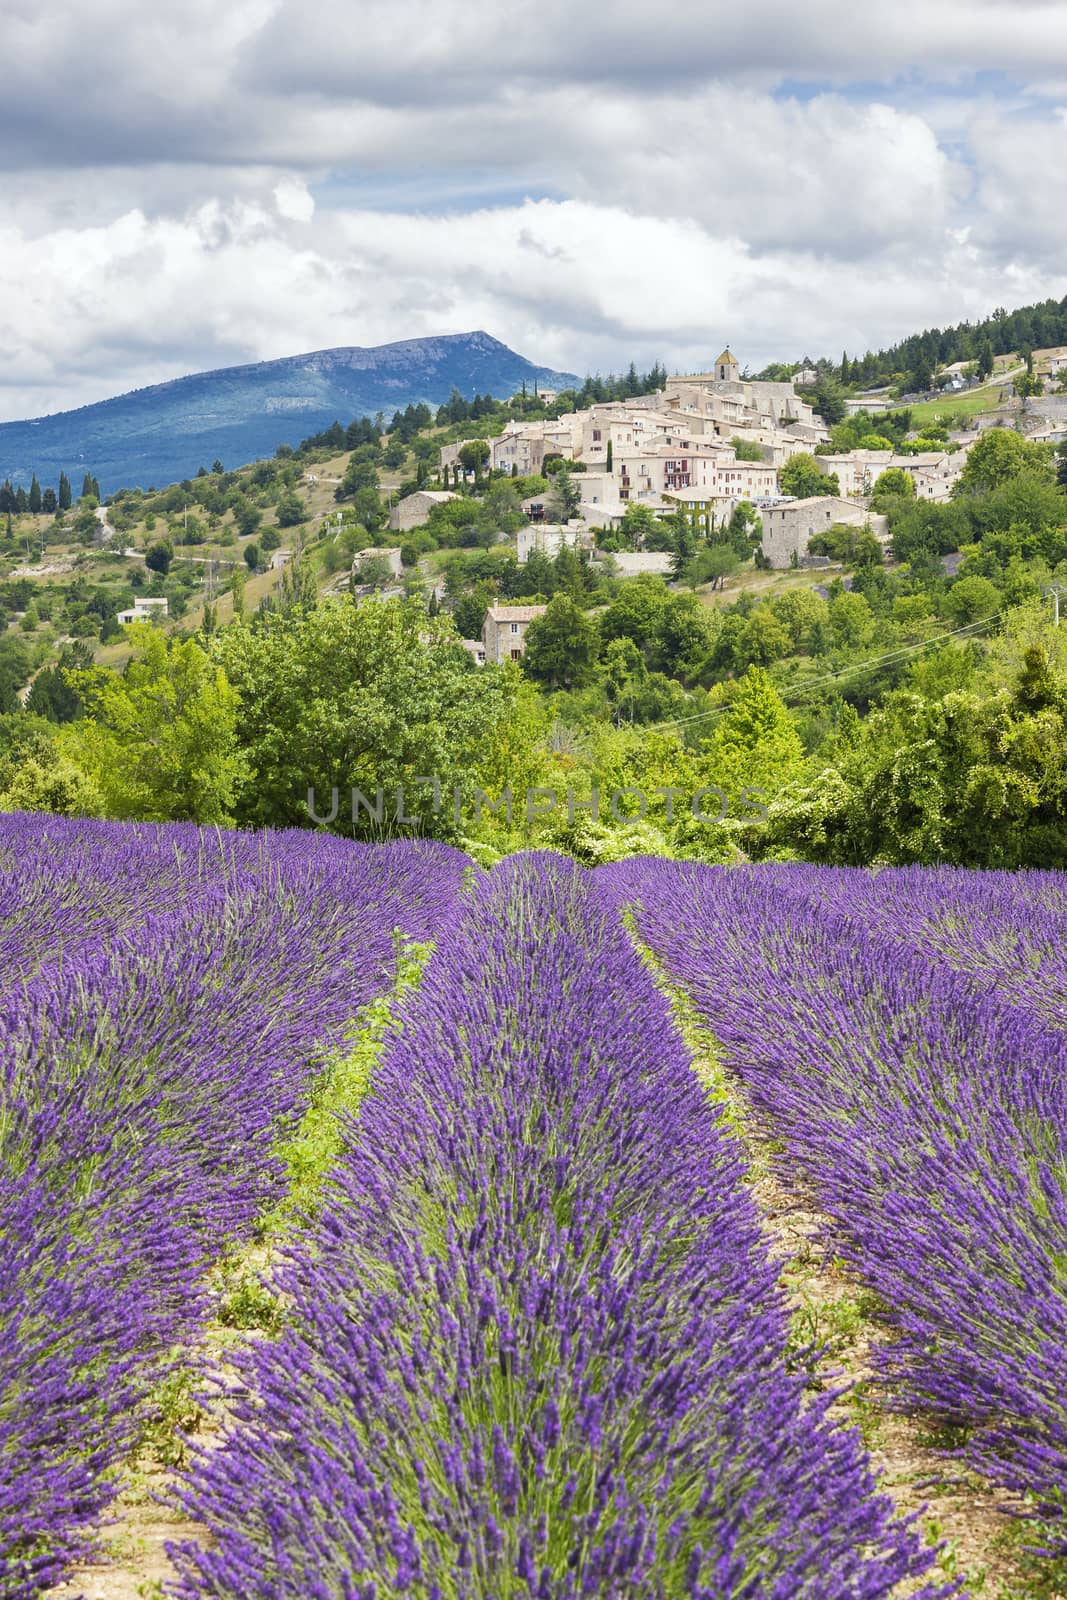 View of french landscape with lavender field and village.